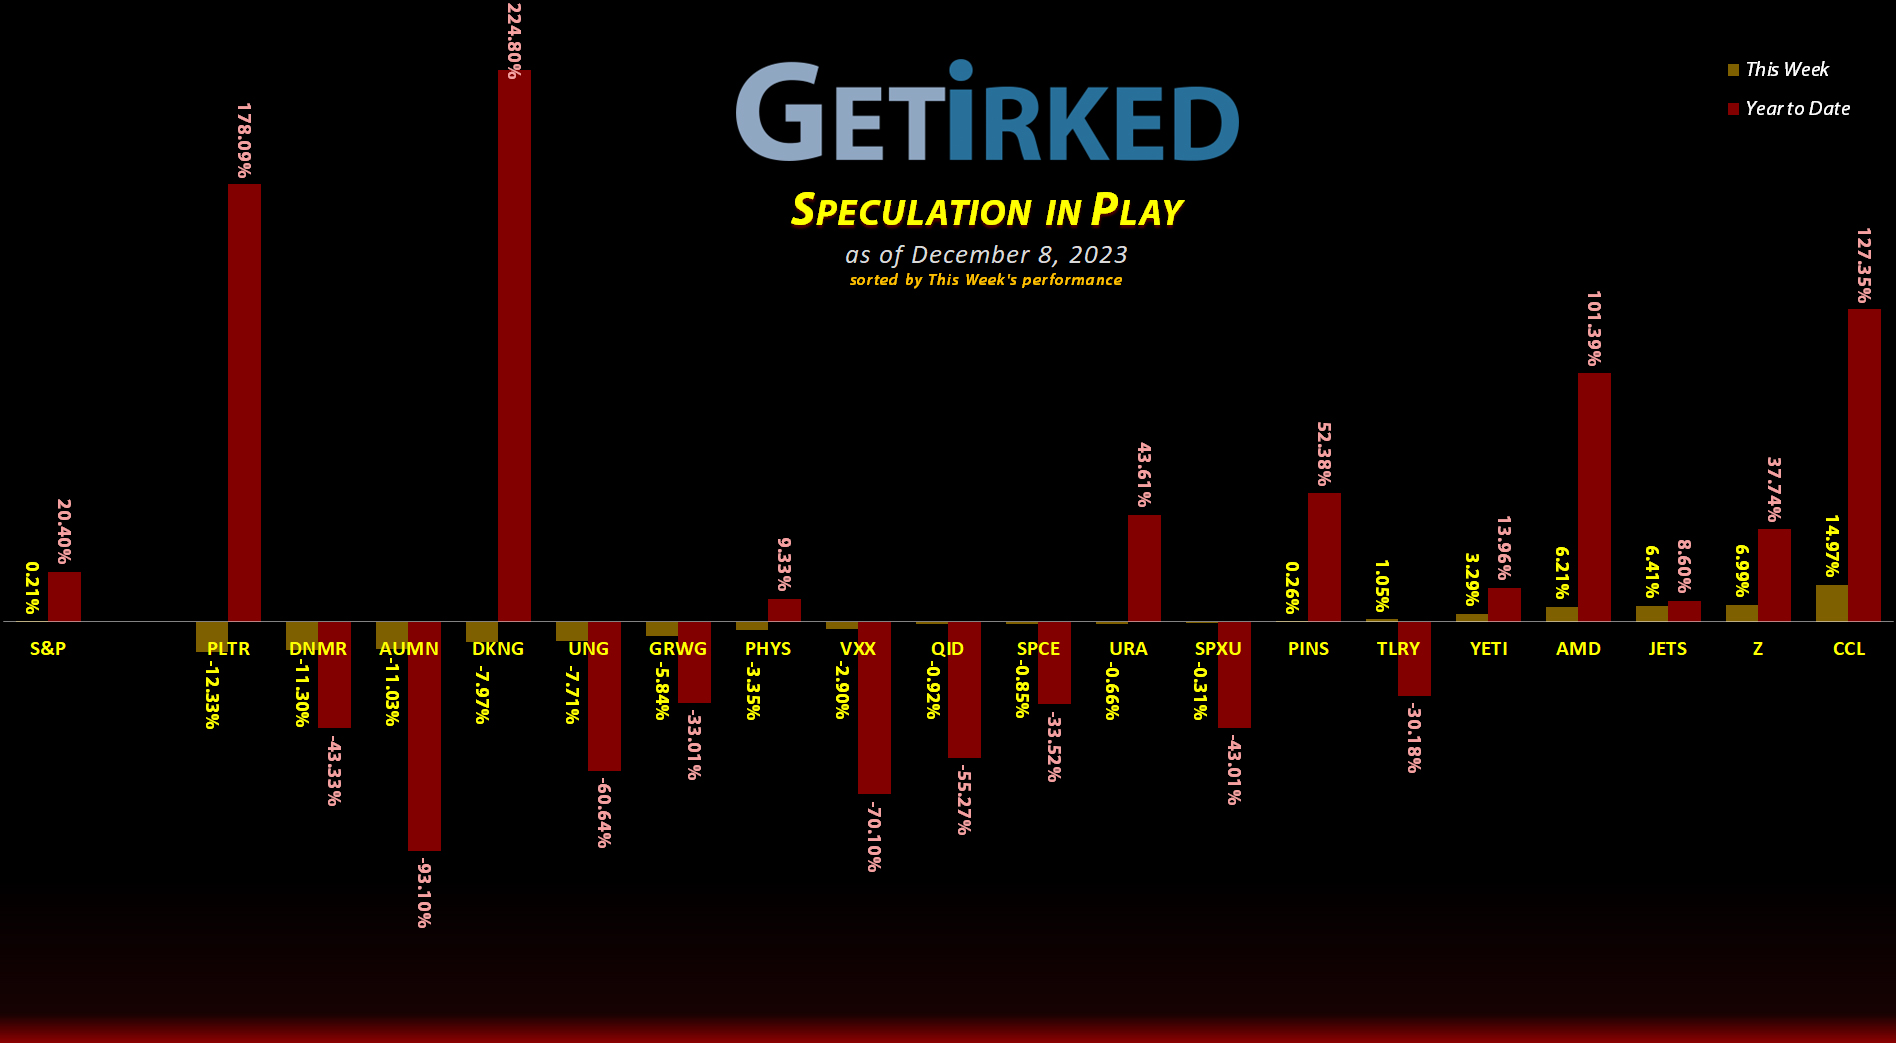 Get Irked's Speculation in Play - December 8, 2023